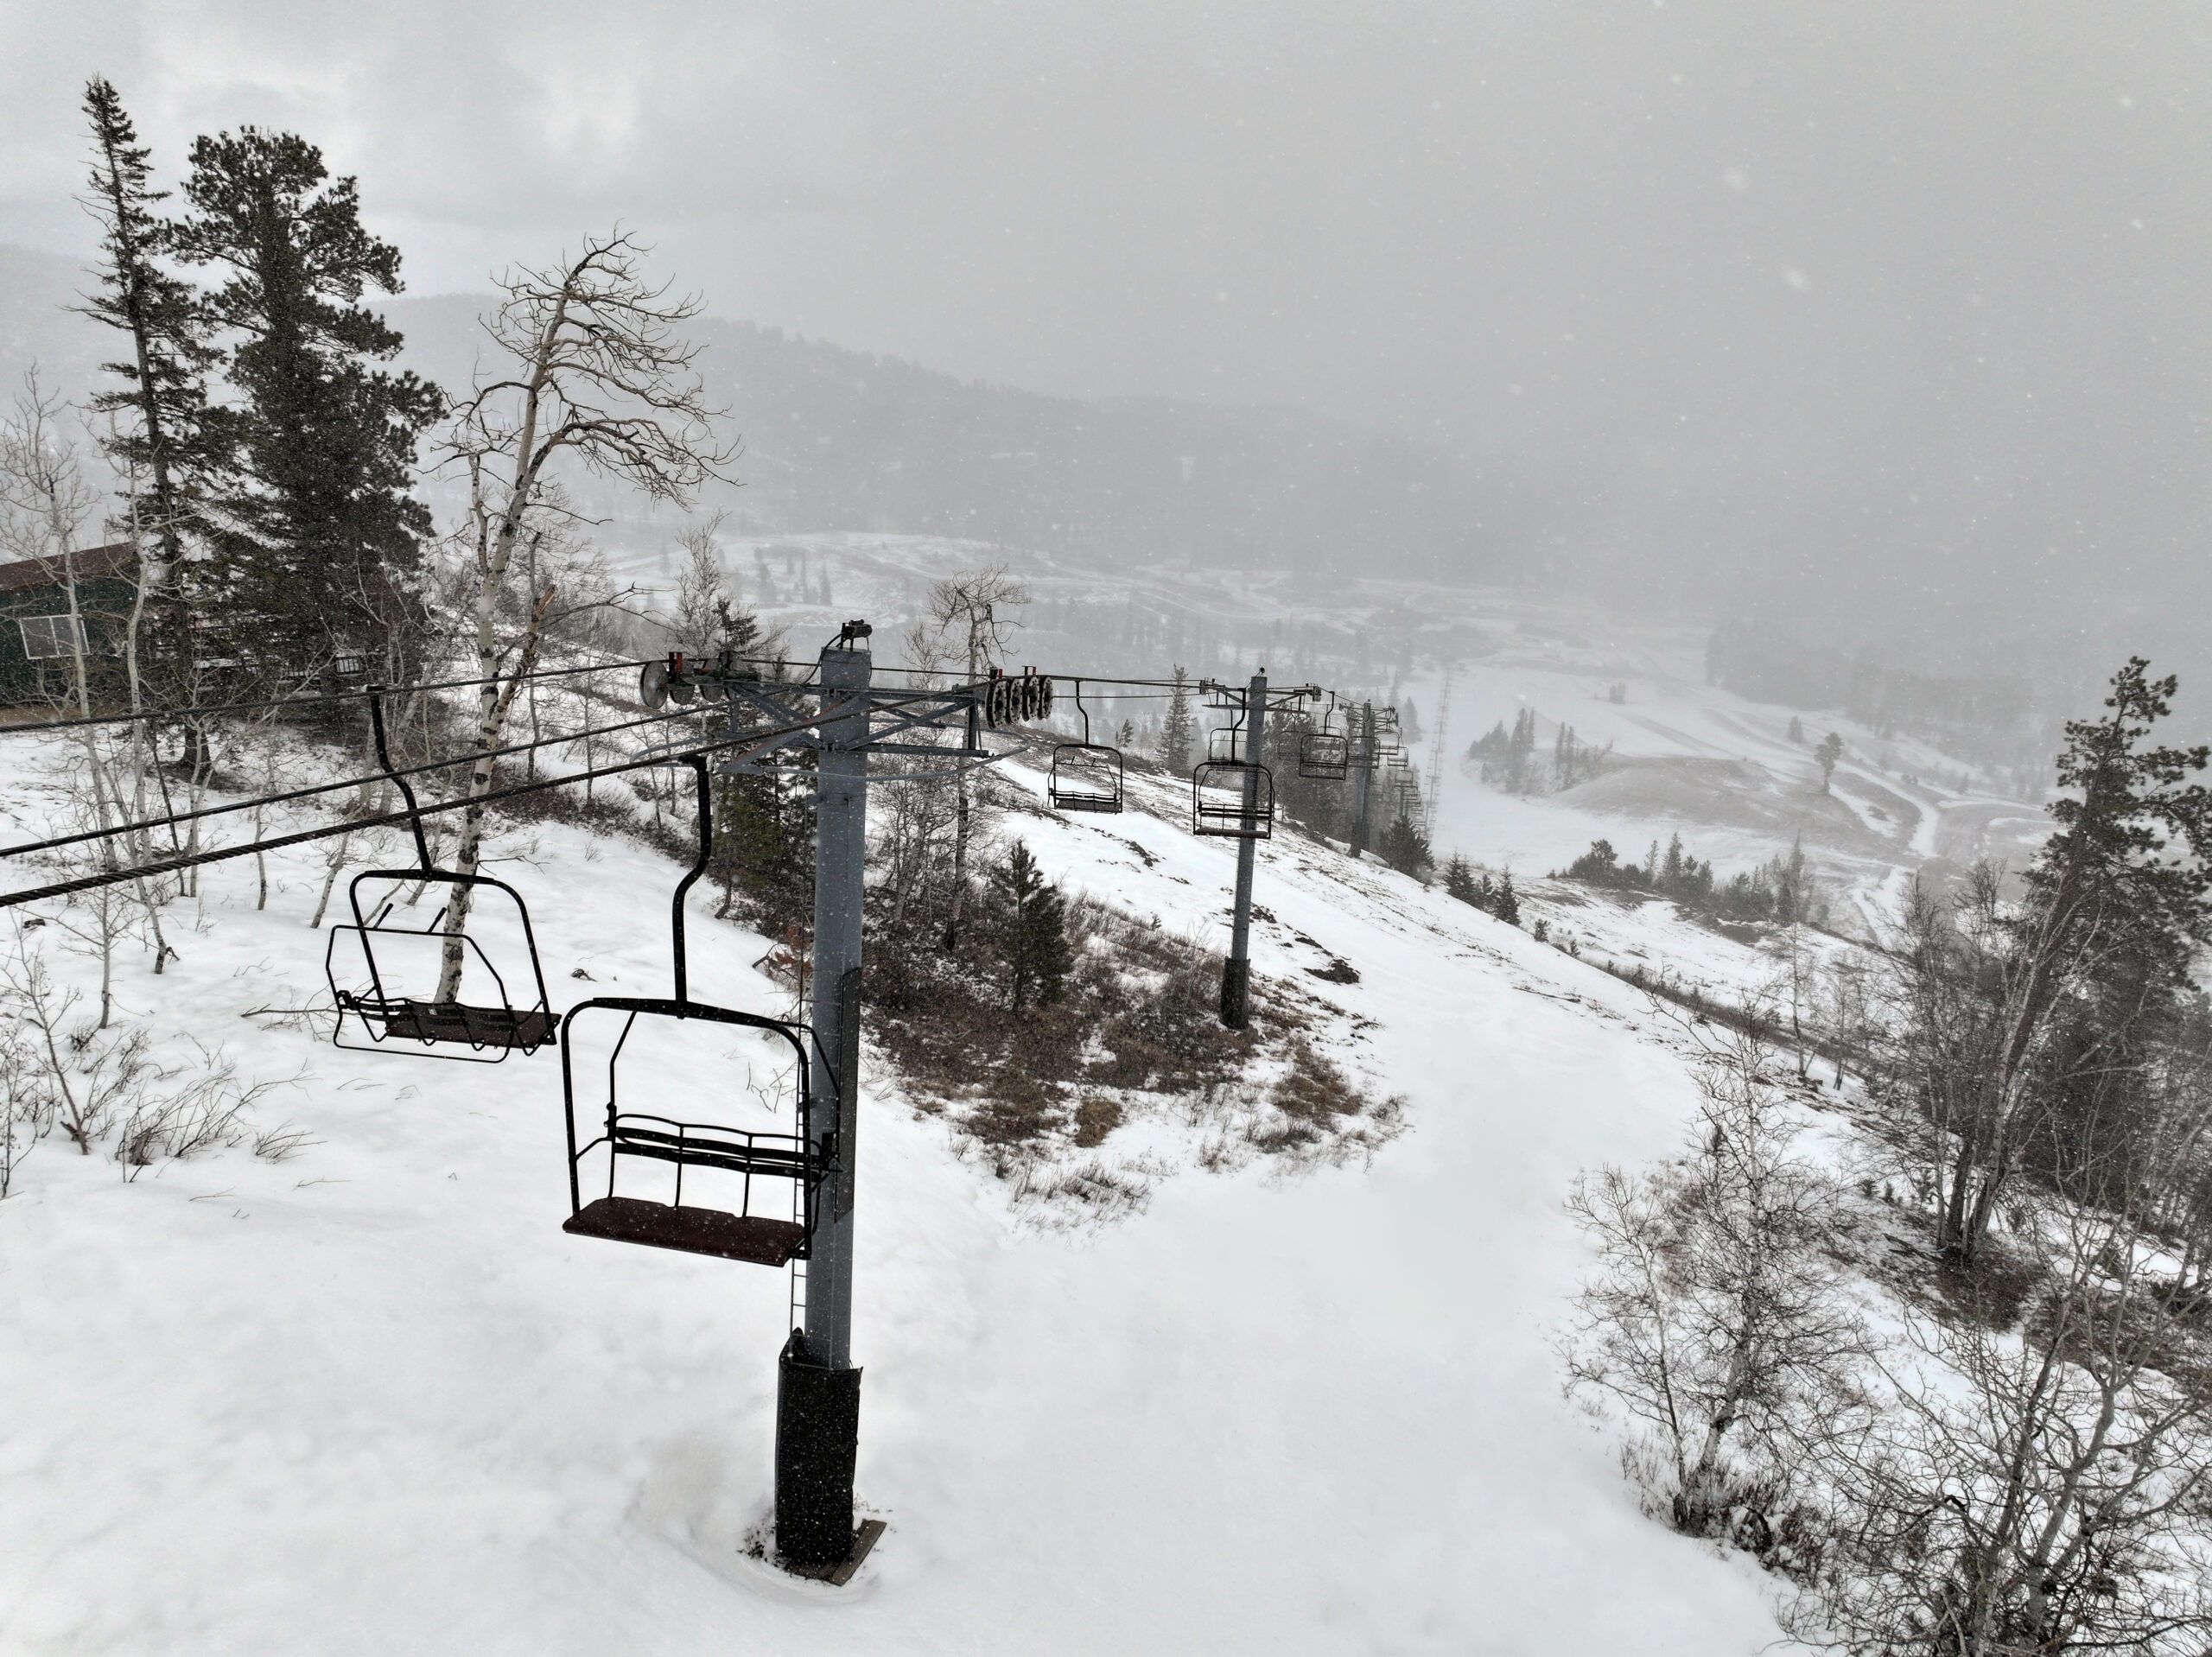 Refurbished East Mountain Chairlift at Deer Mountain Village.